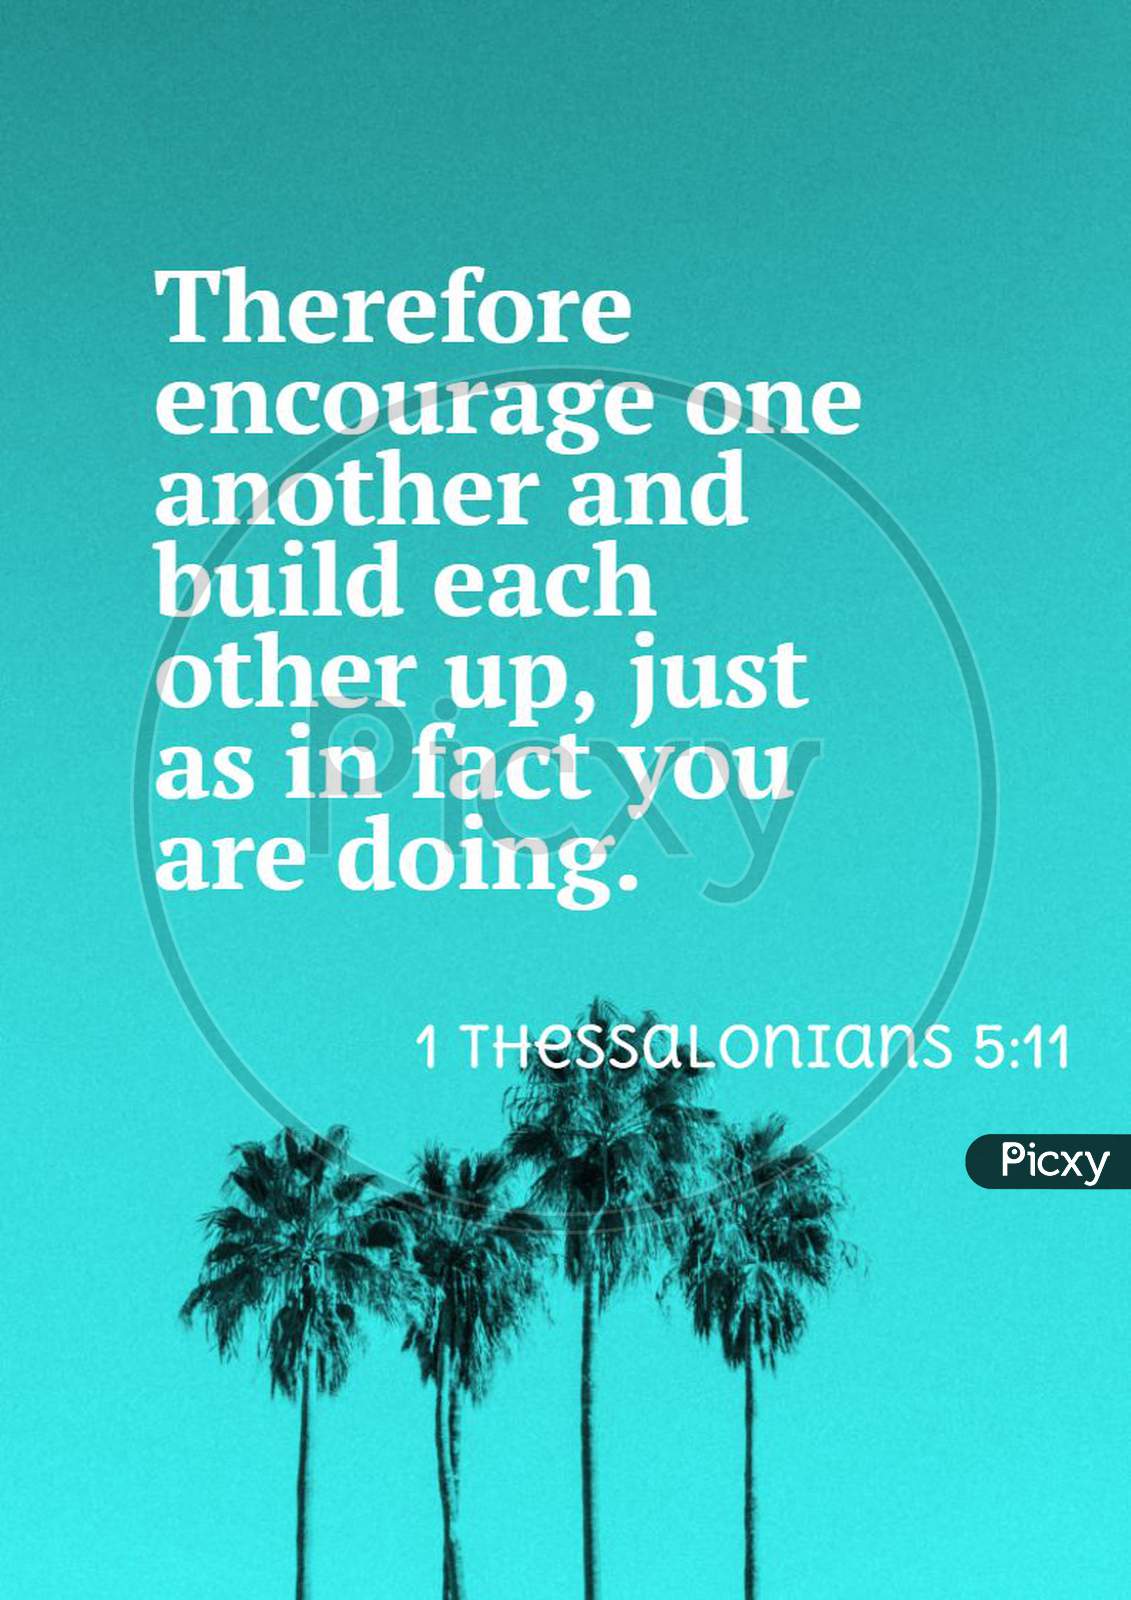 Bible Words 1 Thessalonians 5:11"  Therefore Encourage One Another And Build Each Other Up, Just As In Fact You Are Doing."